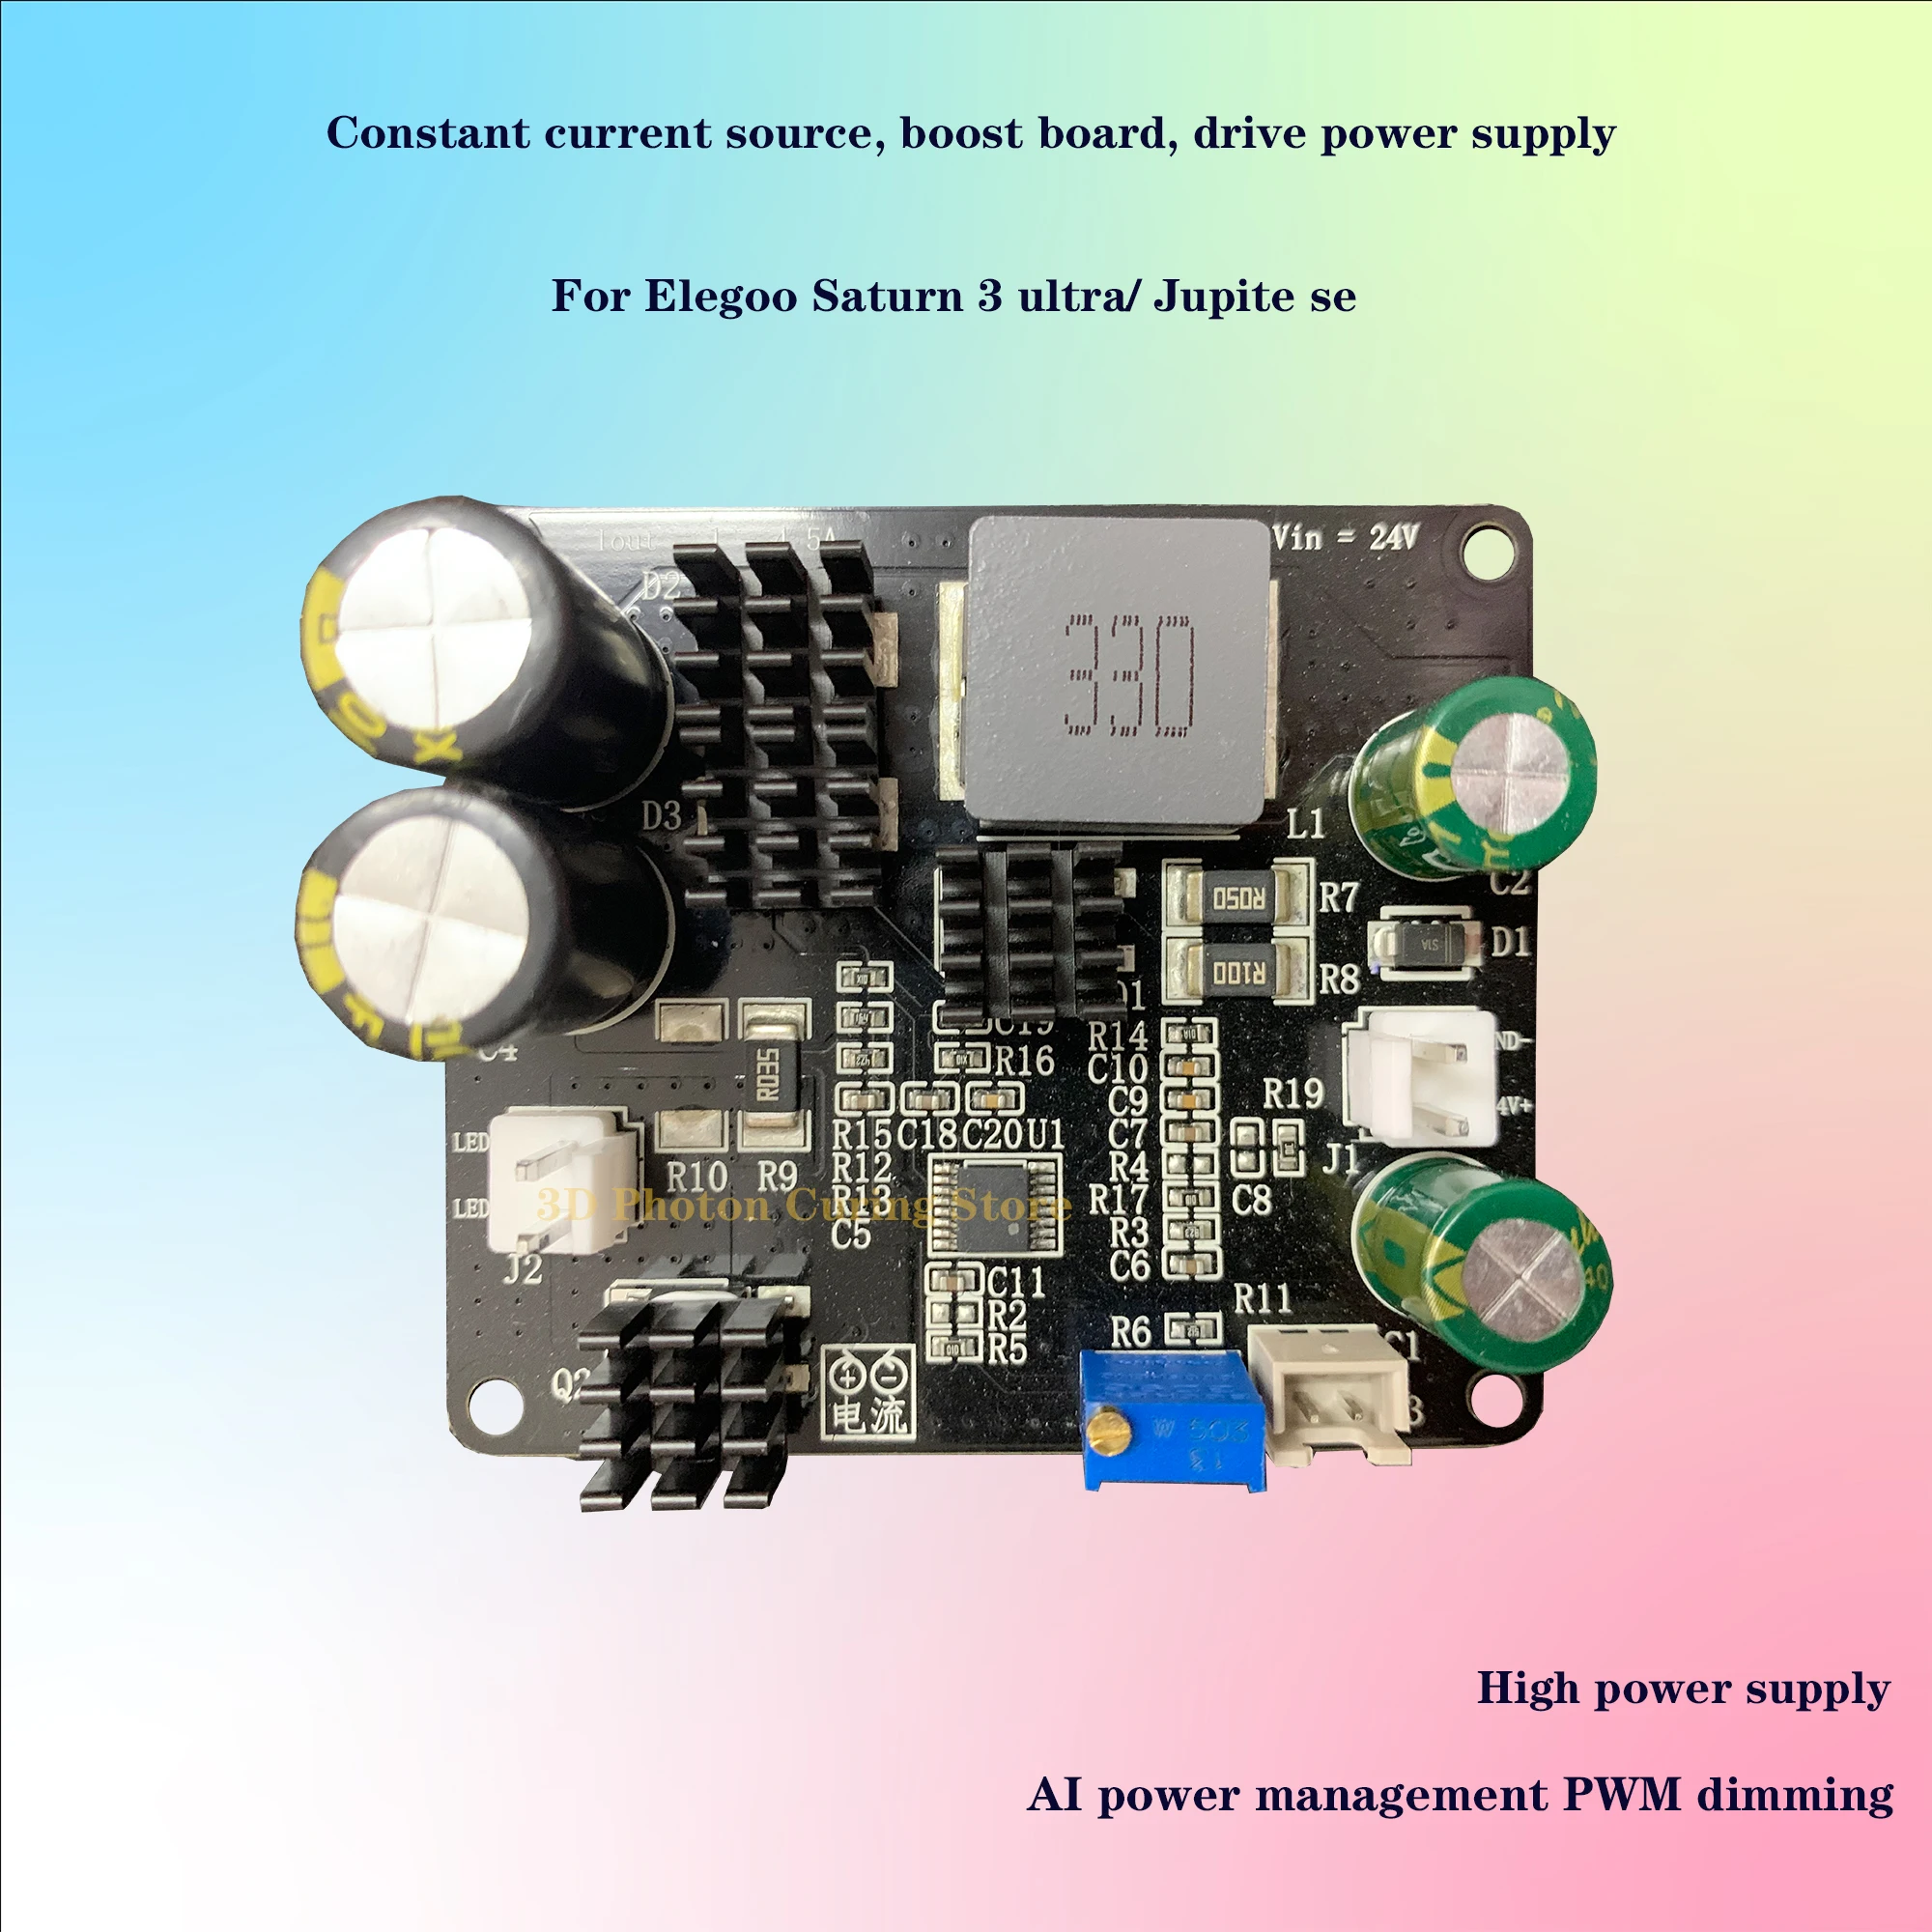 

AI power management PWM dimming Constant current source boost board drive power supply for Elegoo Saturn 3 ultra/ Jupite se